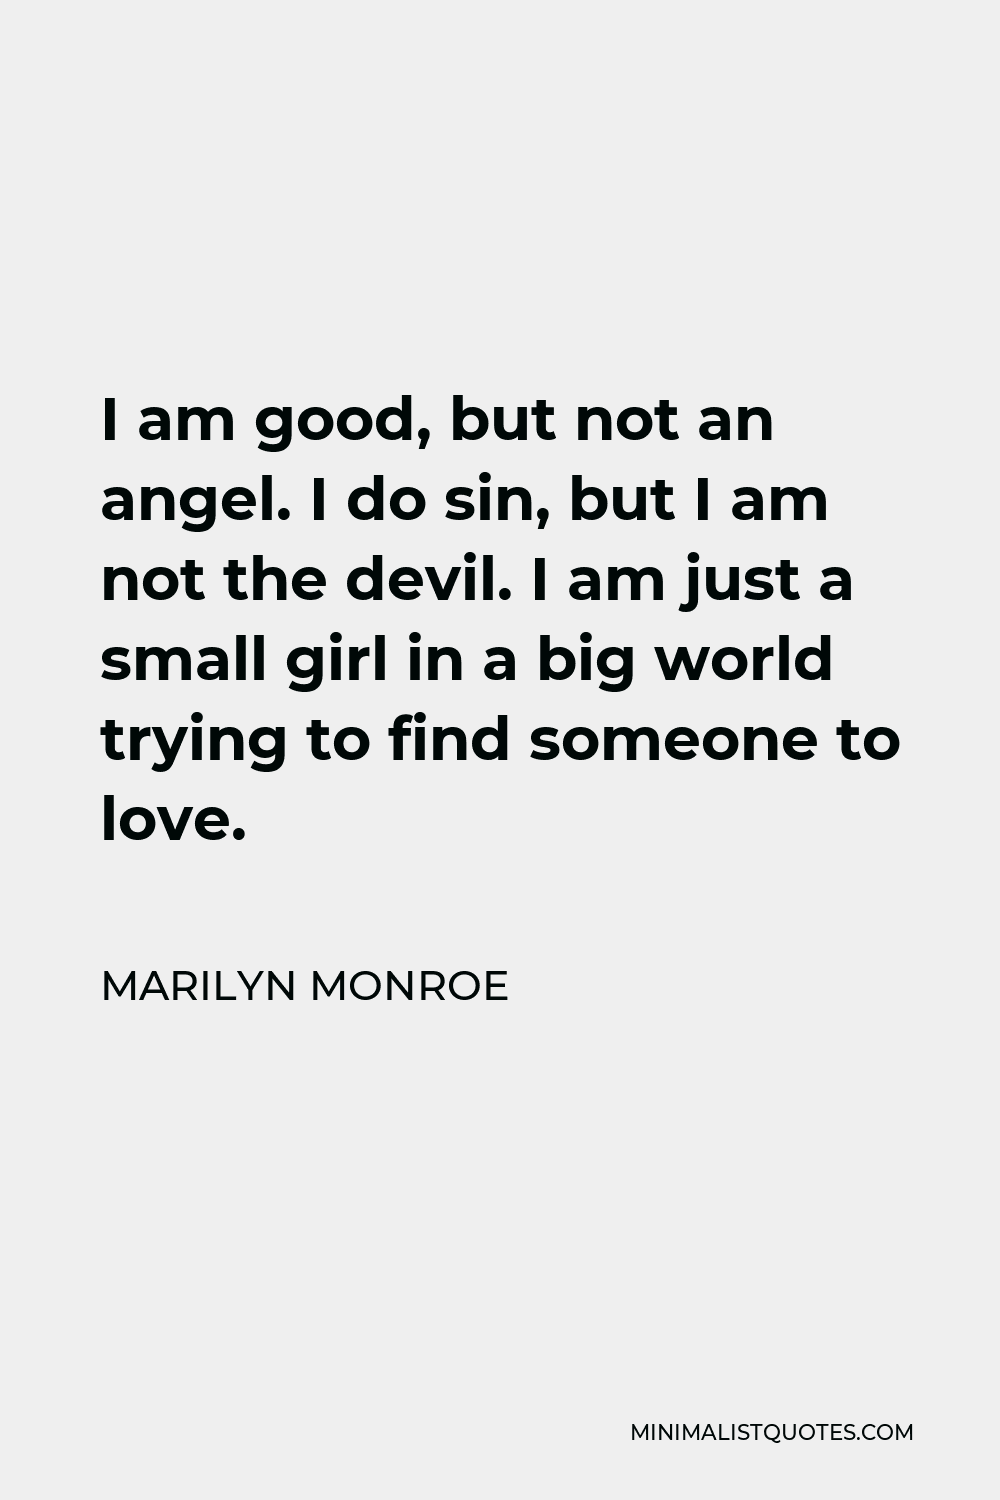 Marilyn Monroe Quote - I am good, but not an angel. I do sin, but I am not the devil. I am just a small girl in a big world trying to find someone to love.